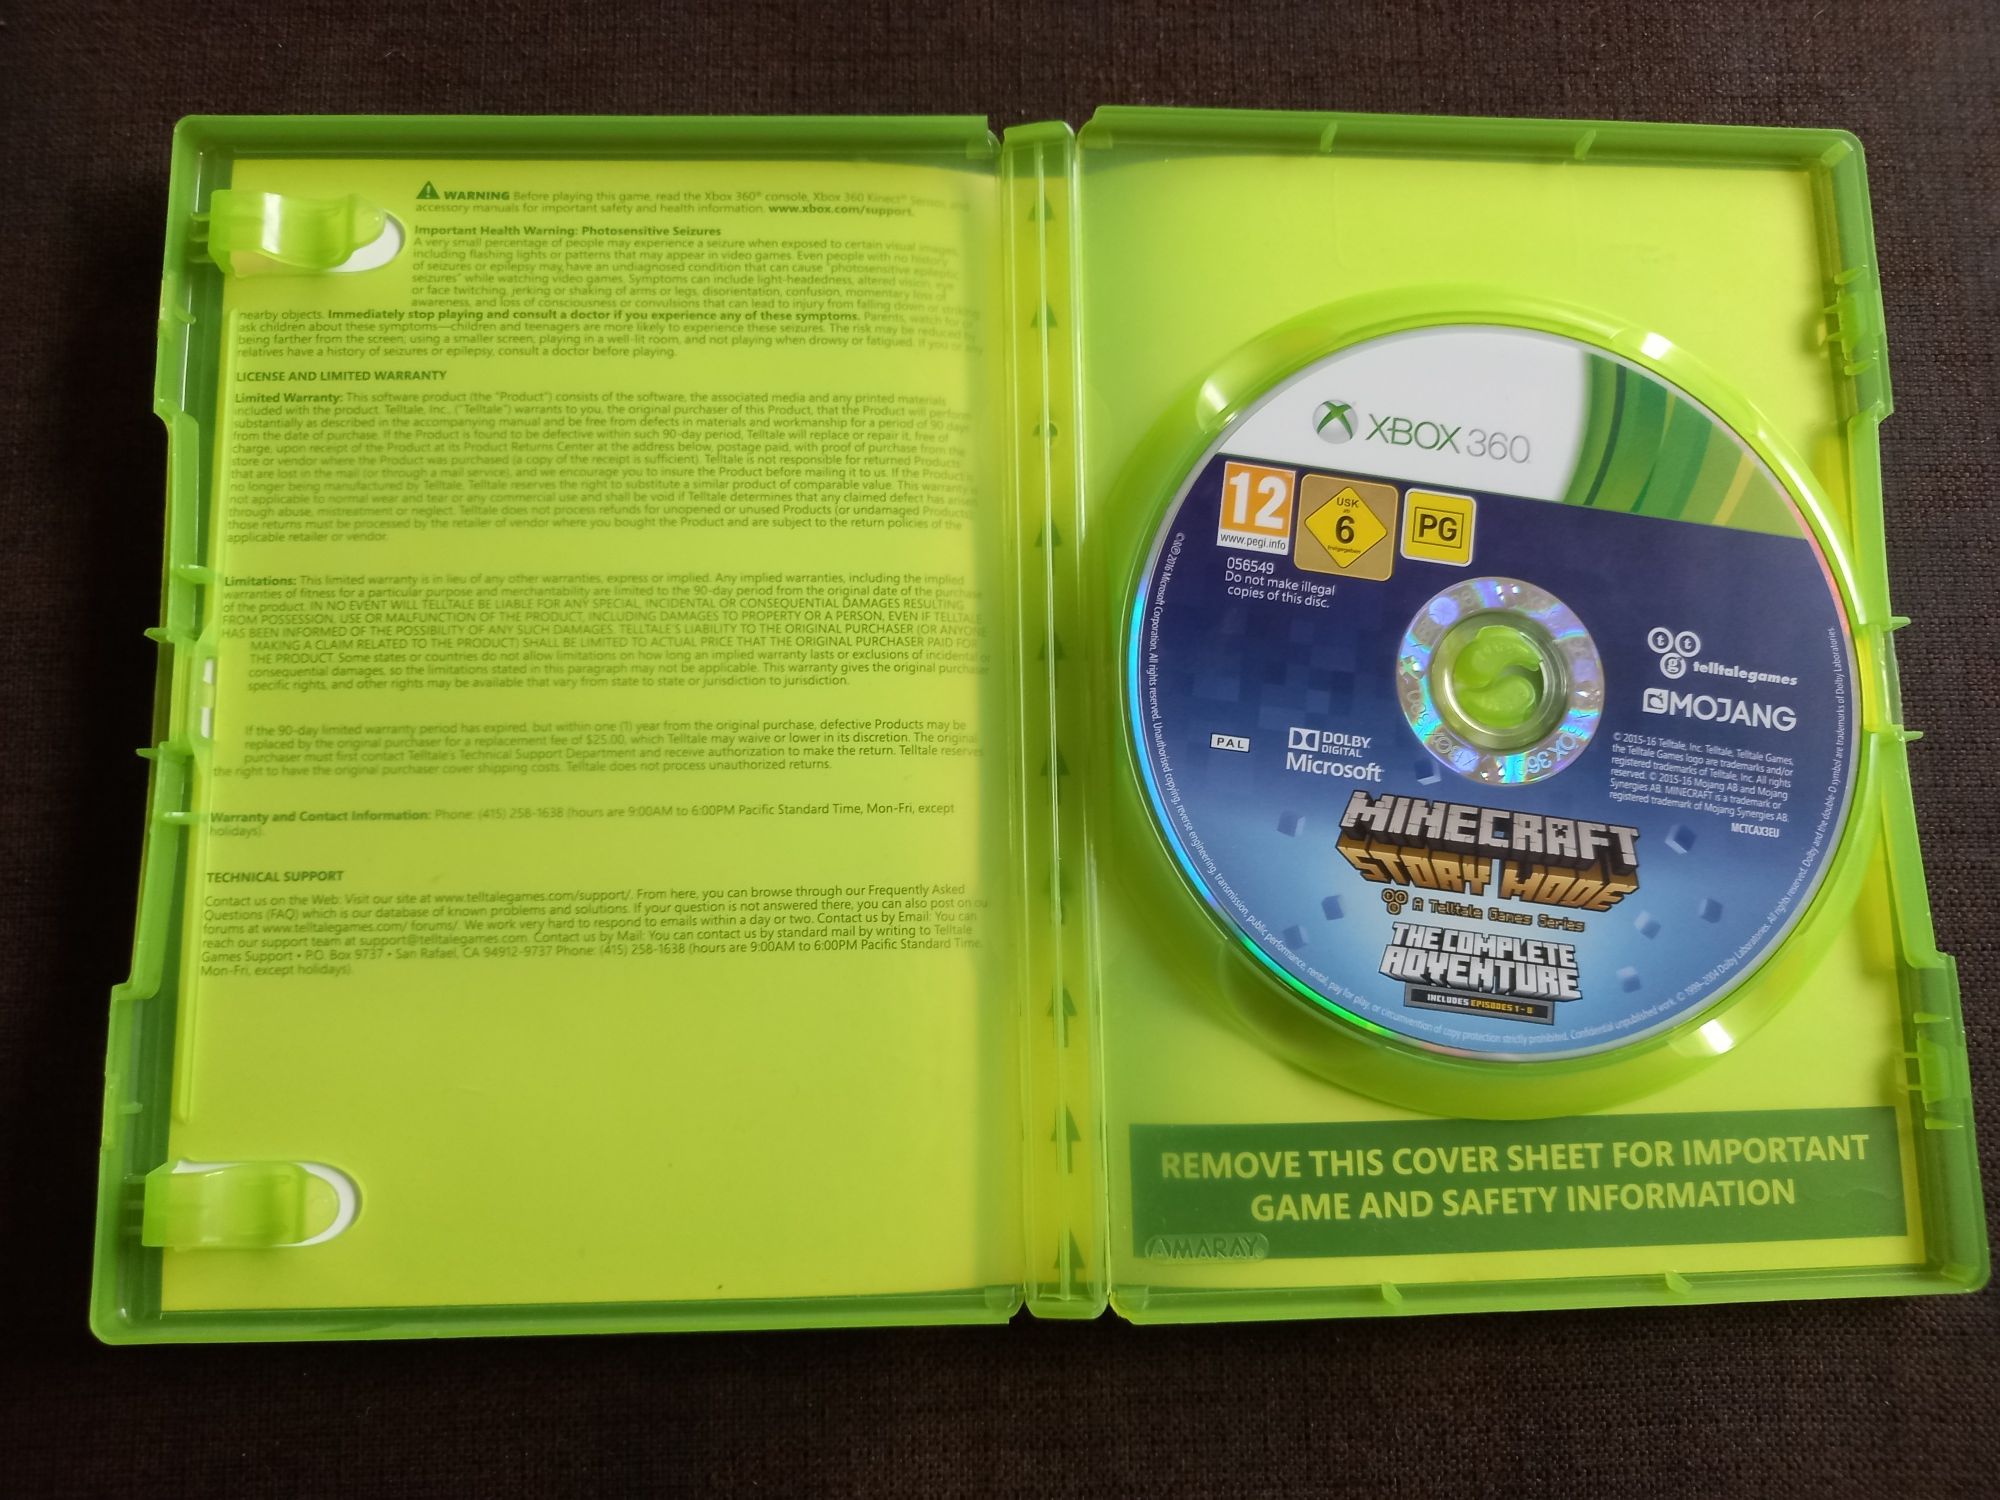 Gra Minecraft Story Mode The Complete Adventure na xbox 360